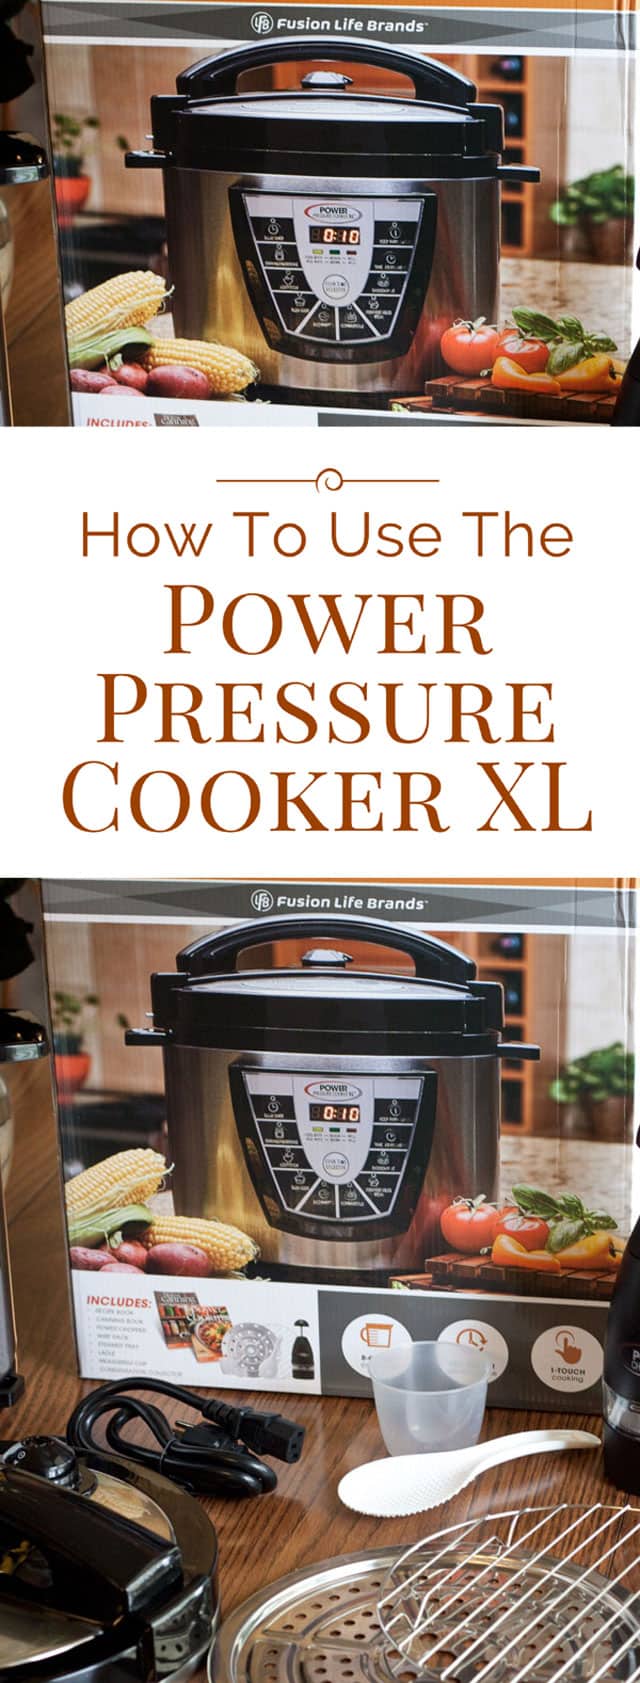 The Power Pressure Cooker XL is one of the best selling electric pressure cookers. Here\'s everything you need to know about how to use the Power Pressure Cooker XL